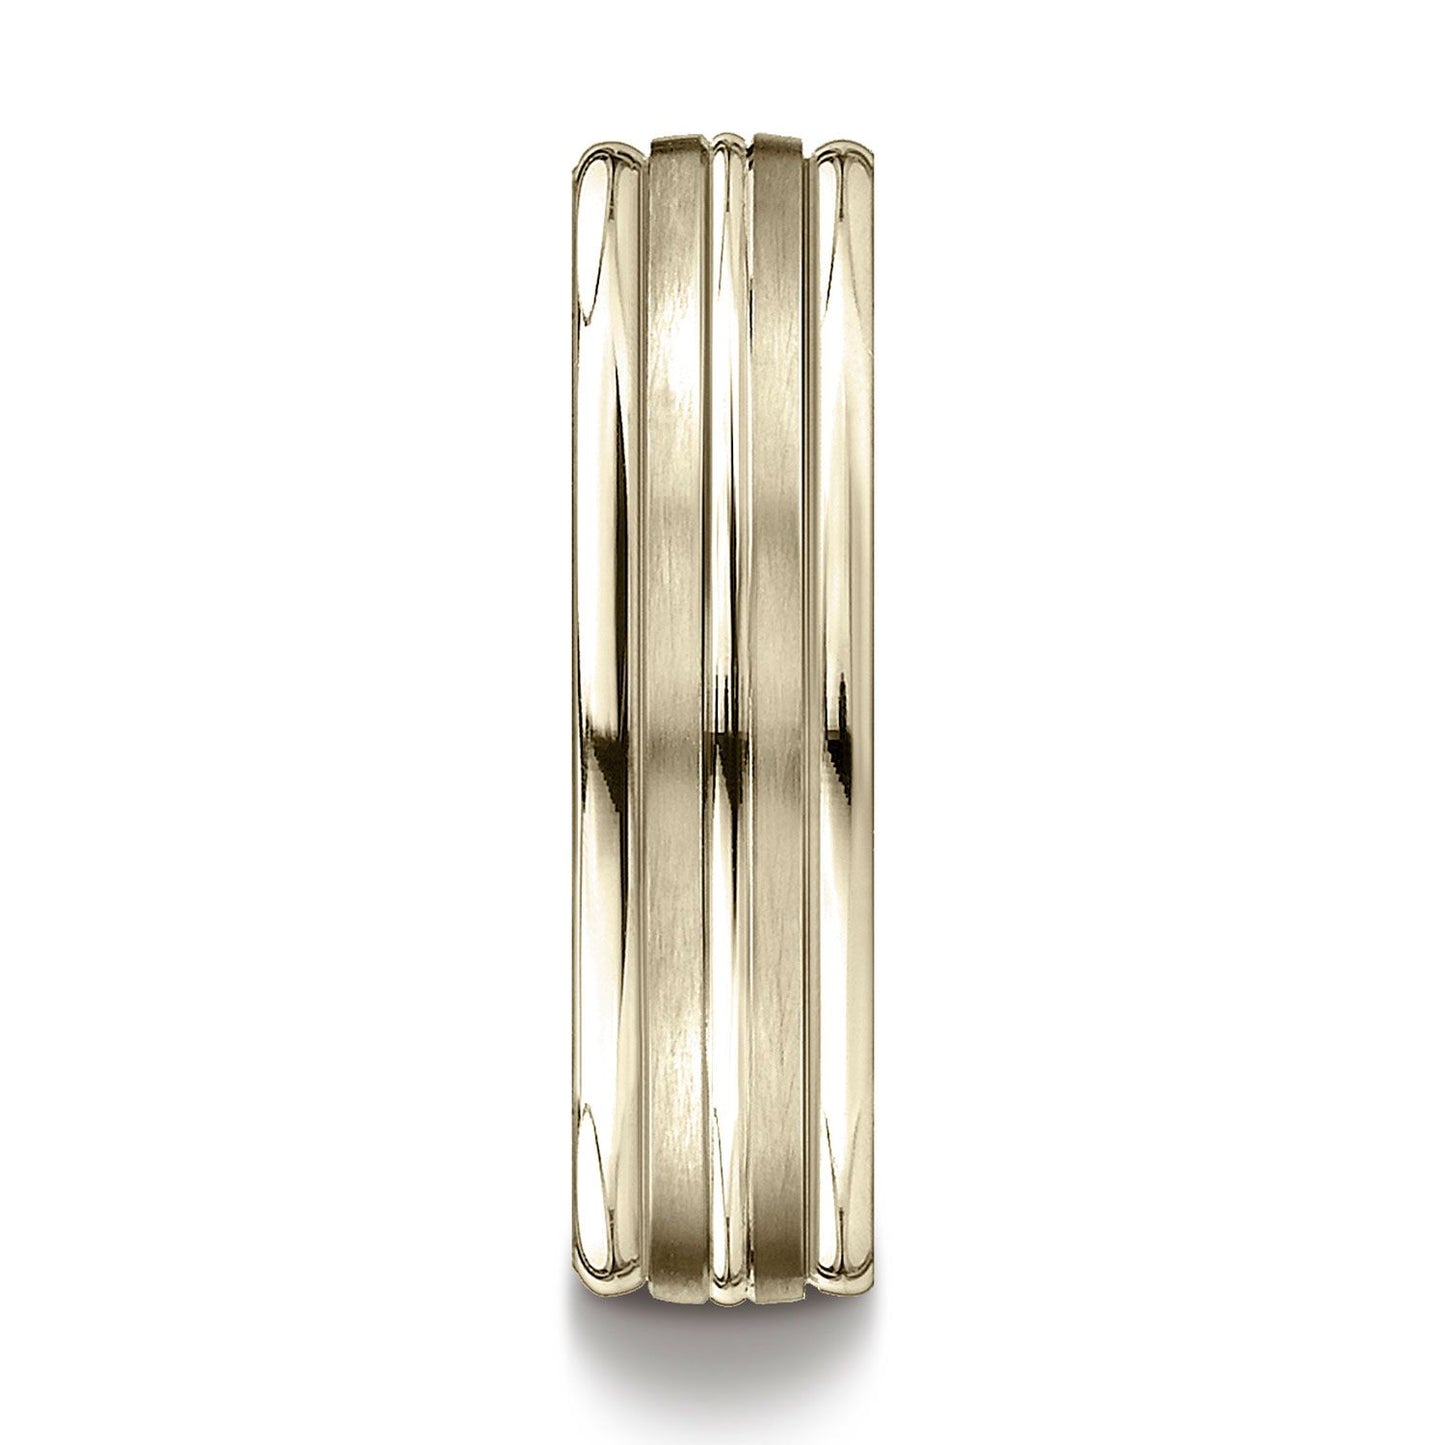 18k Yellow Gold 6mm Comfort-fit Satin-finished High Polished Center Trim And Round Edge Carved Design Band